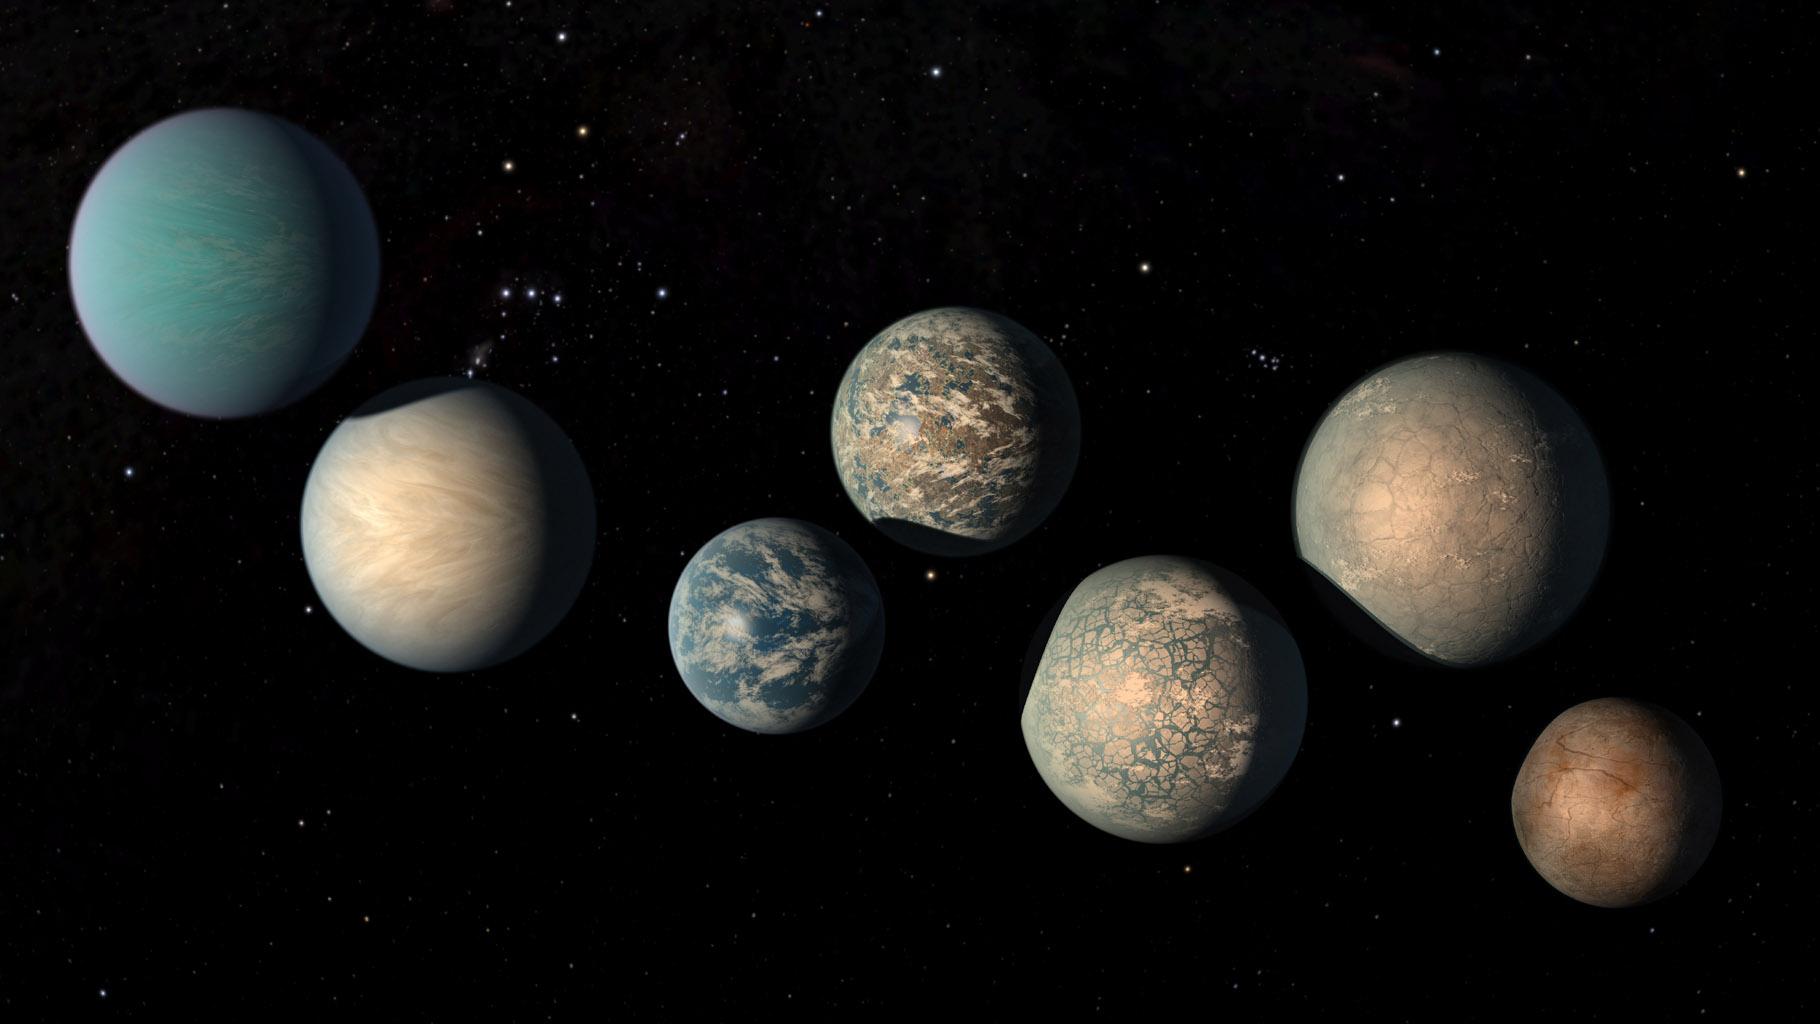 Space Image. Illustration Of TRAPPIST 1 Planets As Of Feb. 2018